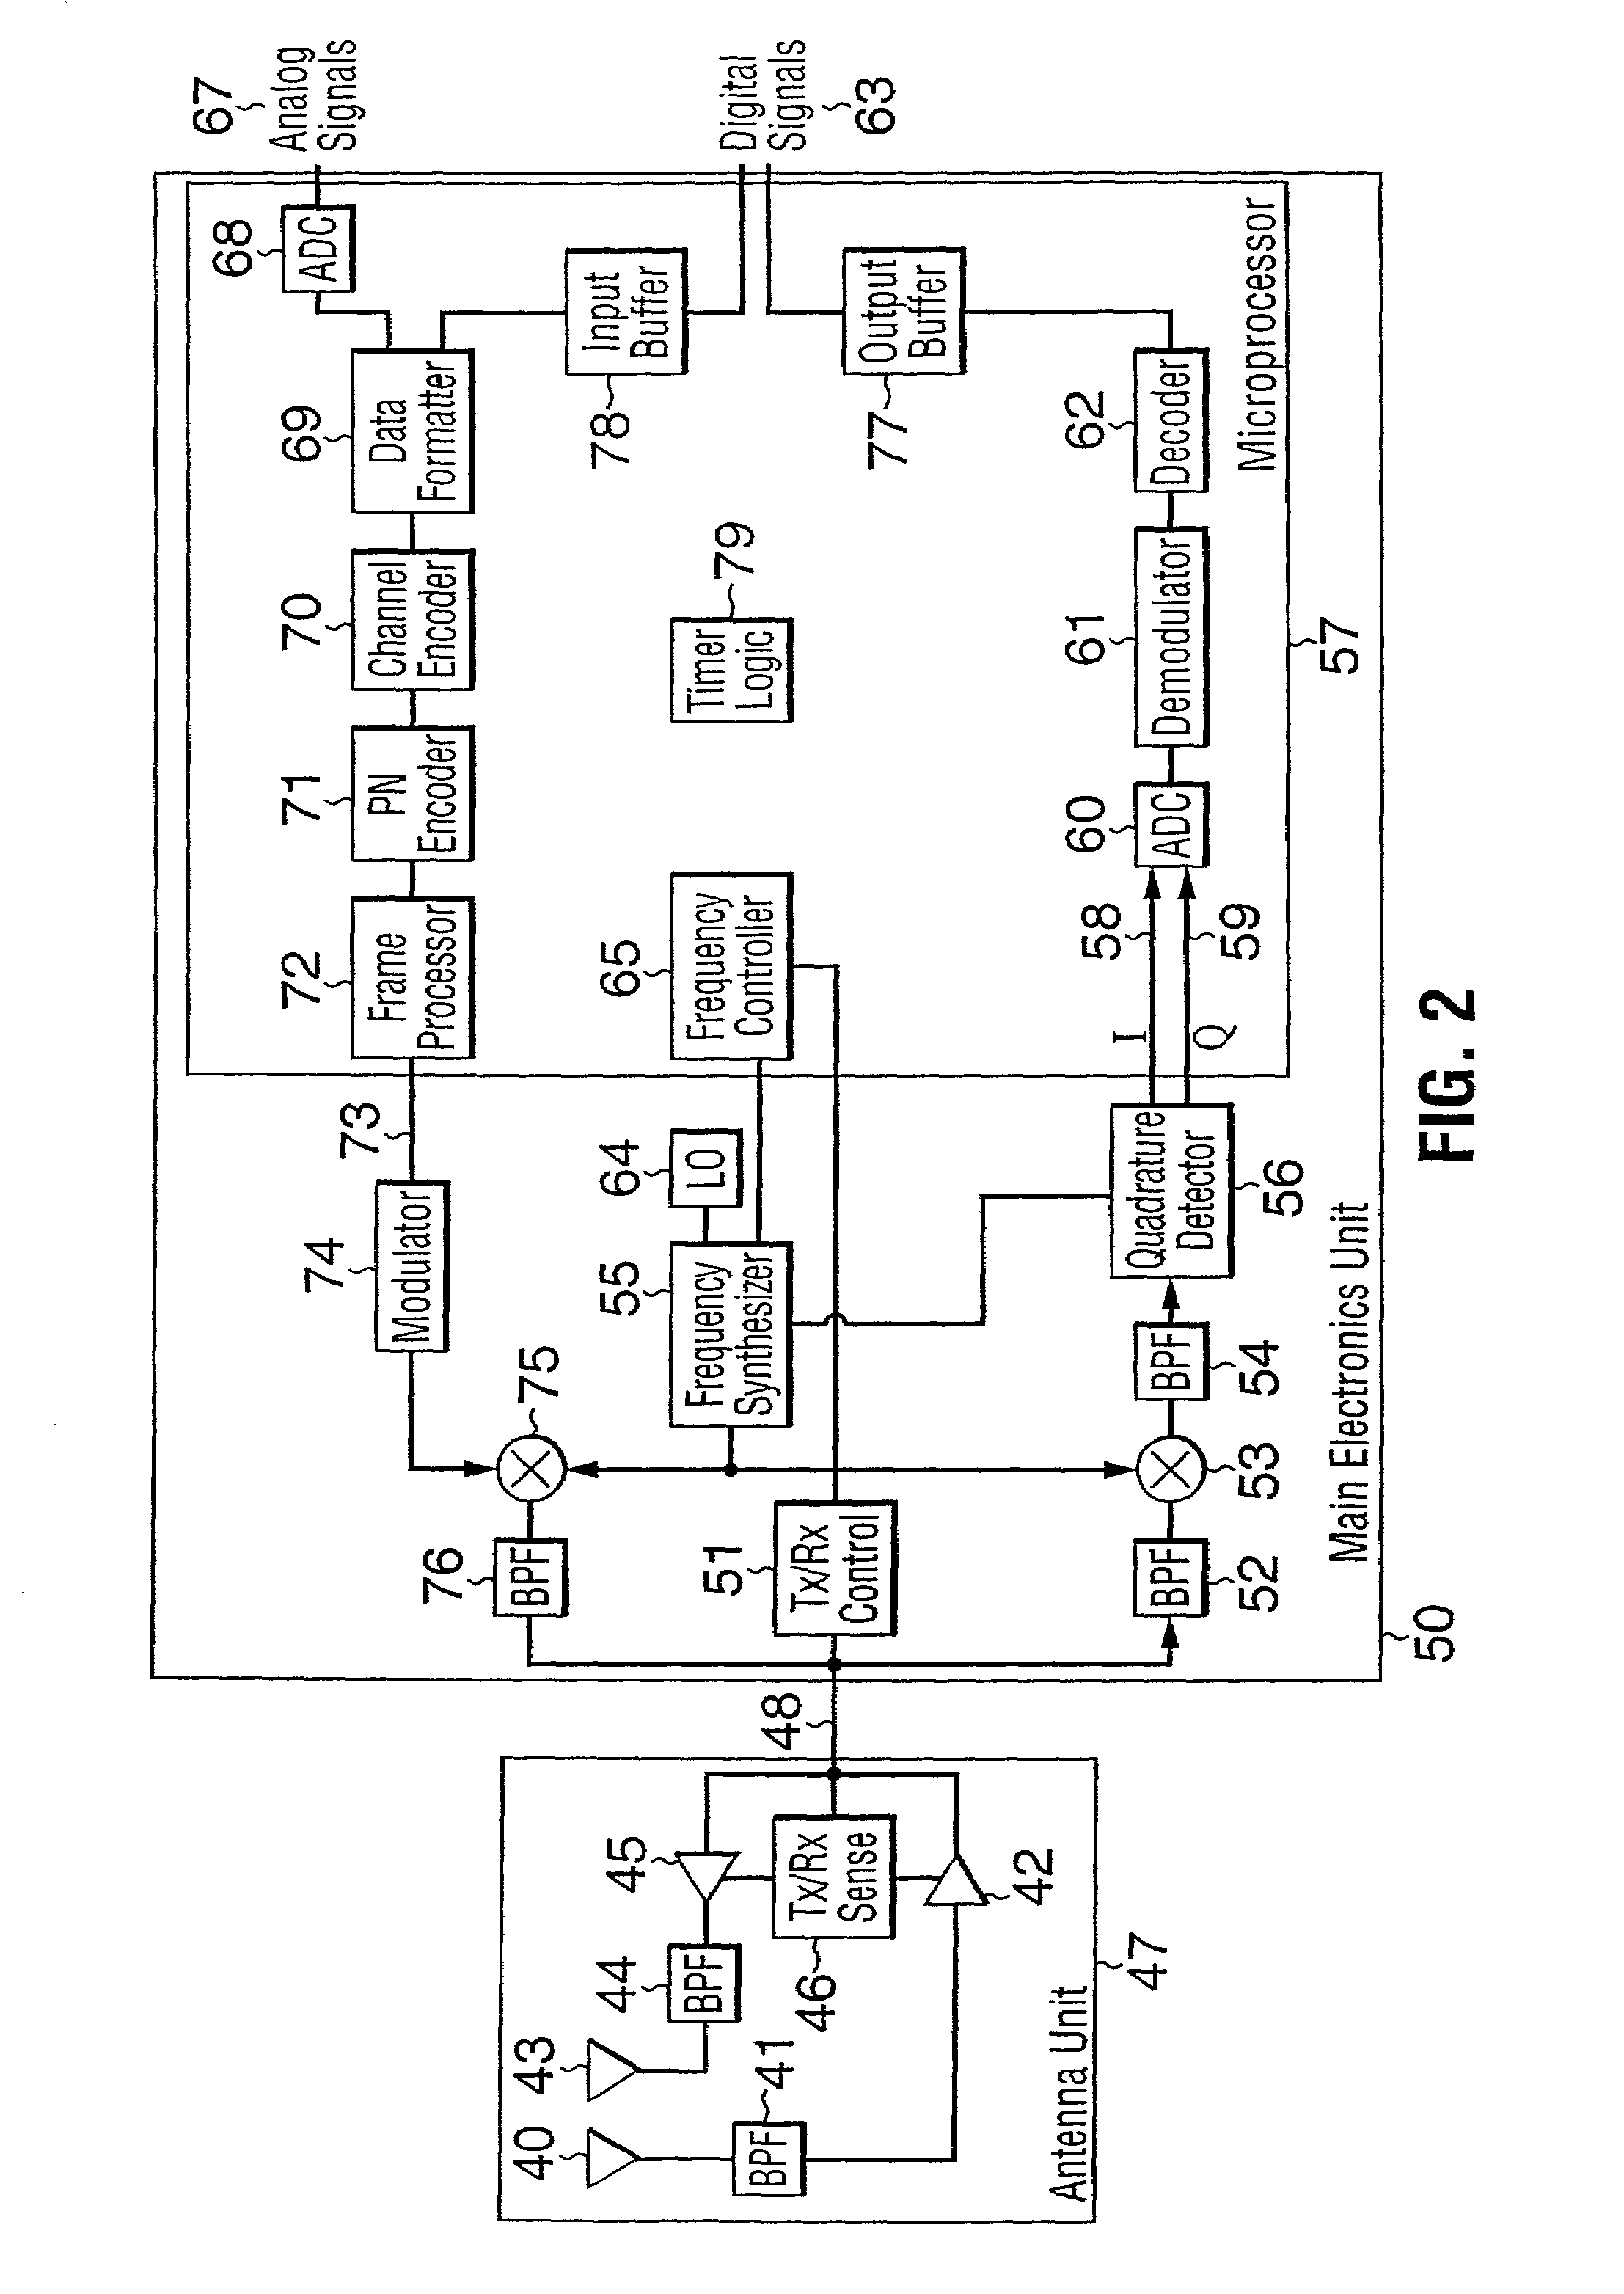 Wireless packet data distributed communications system